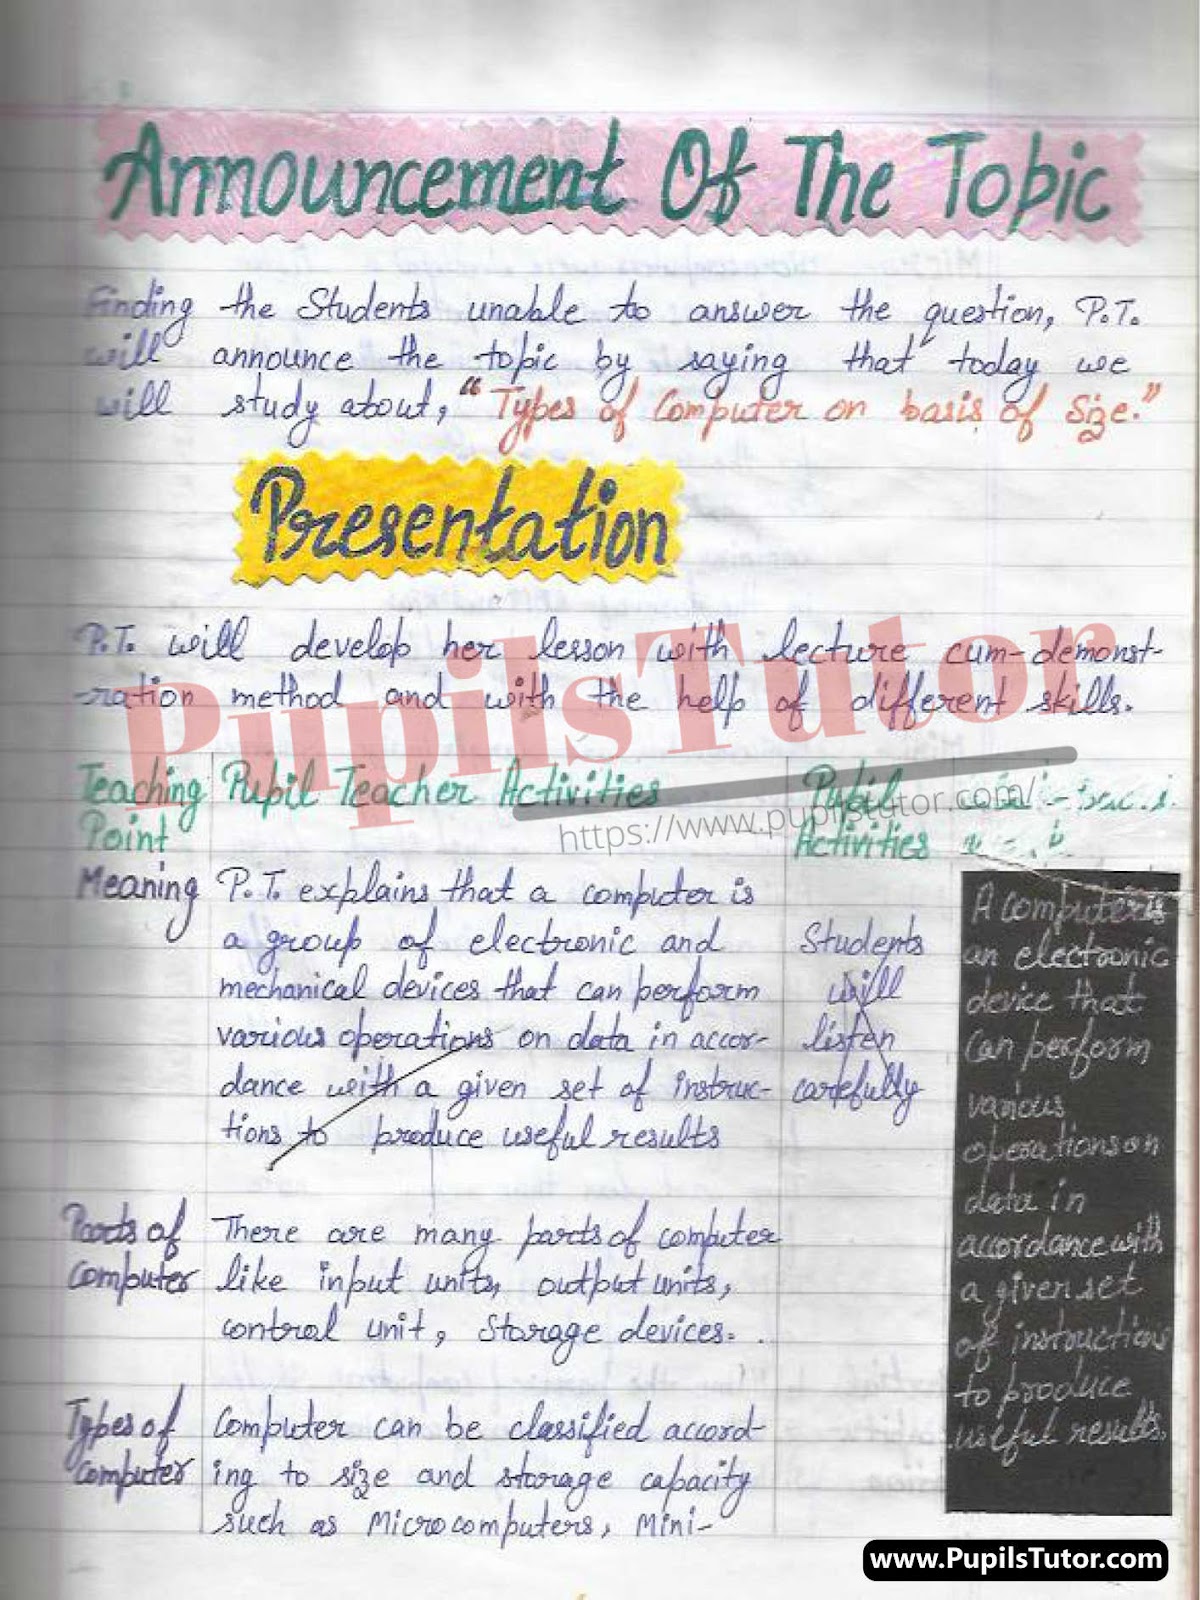 Computer Lesson Plan On Classification Of Computer For Class/Grade 6 For CBSE NCERT School And College Teachers  – (Page And Image Number 3) – www.pupilstutor.com